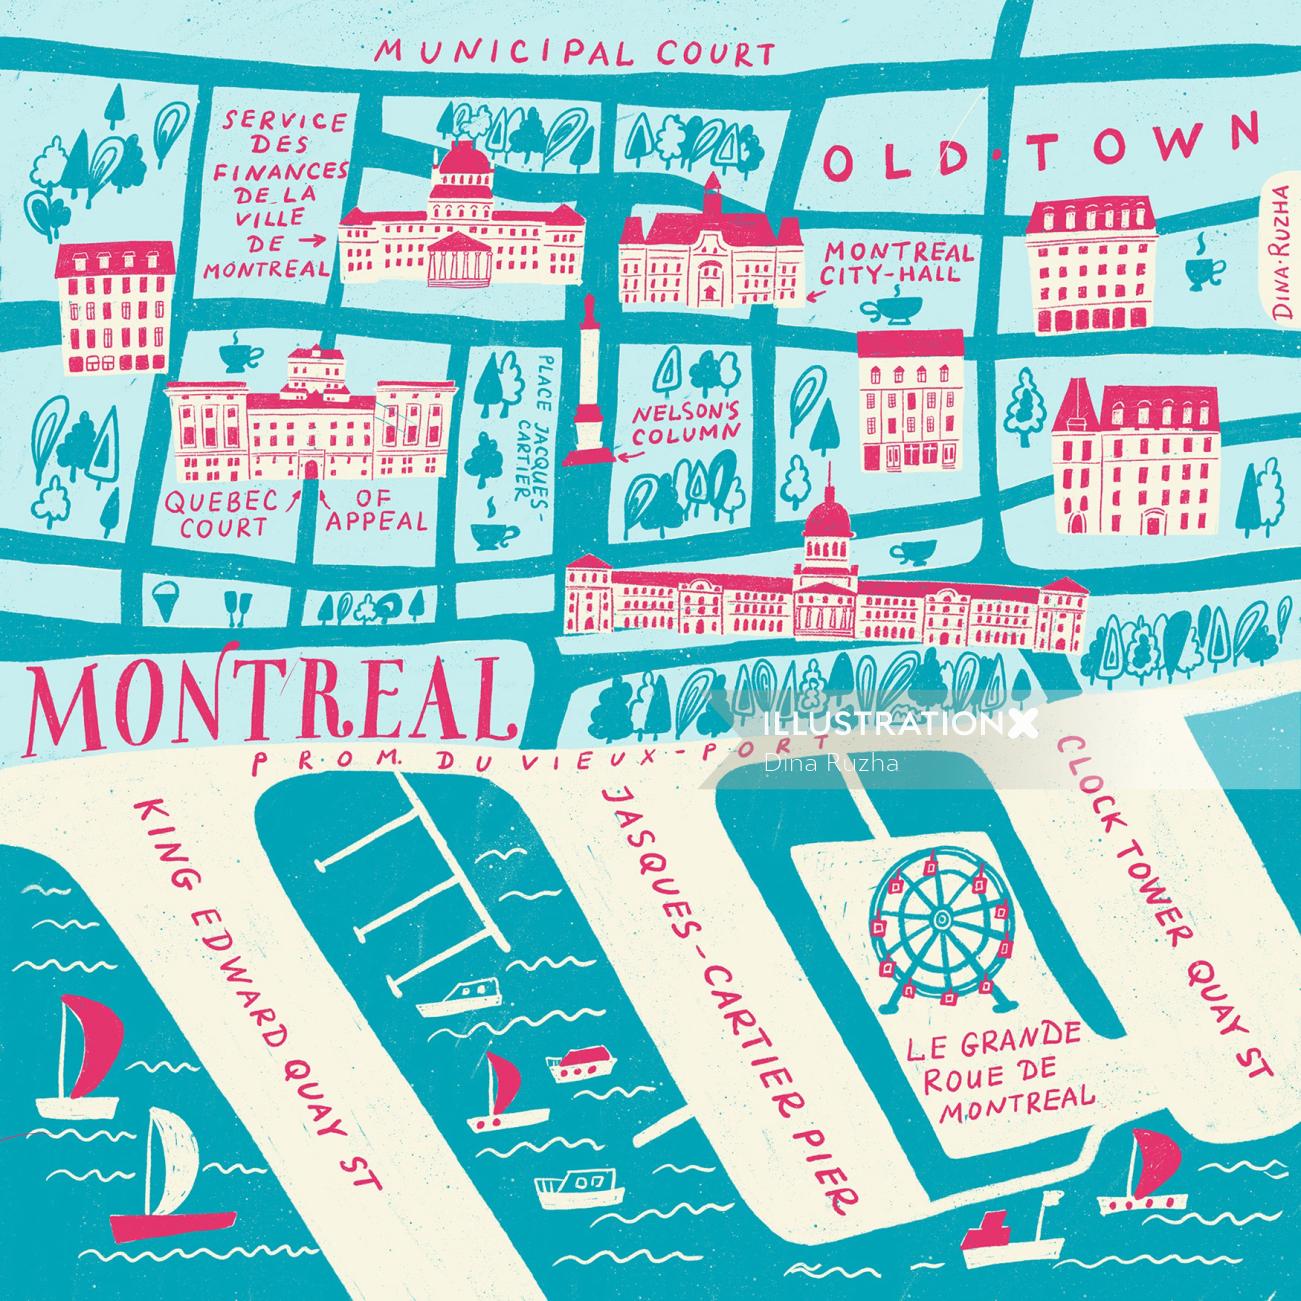 An illustrated map of Montreal